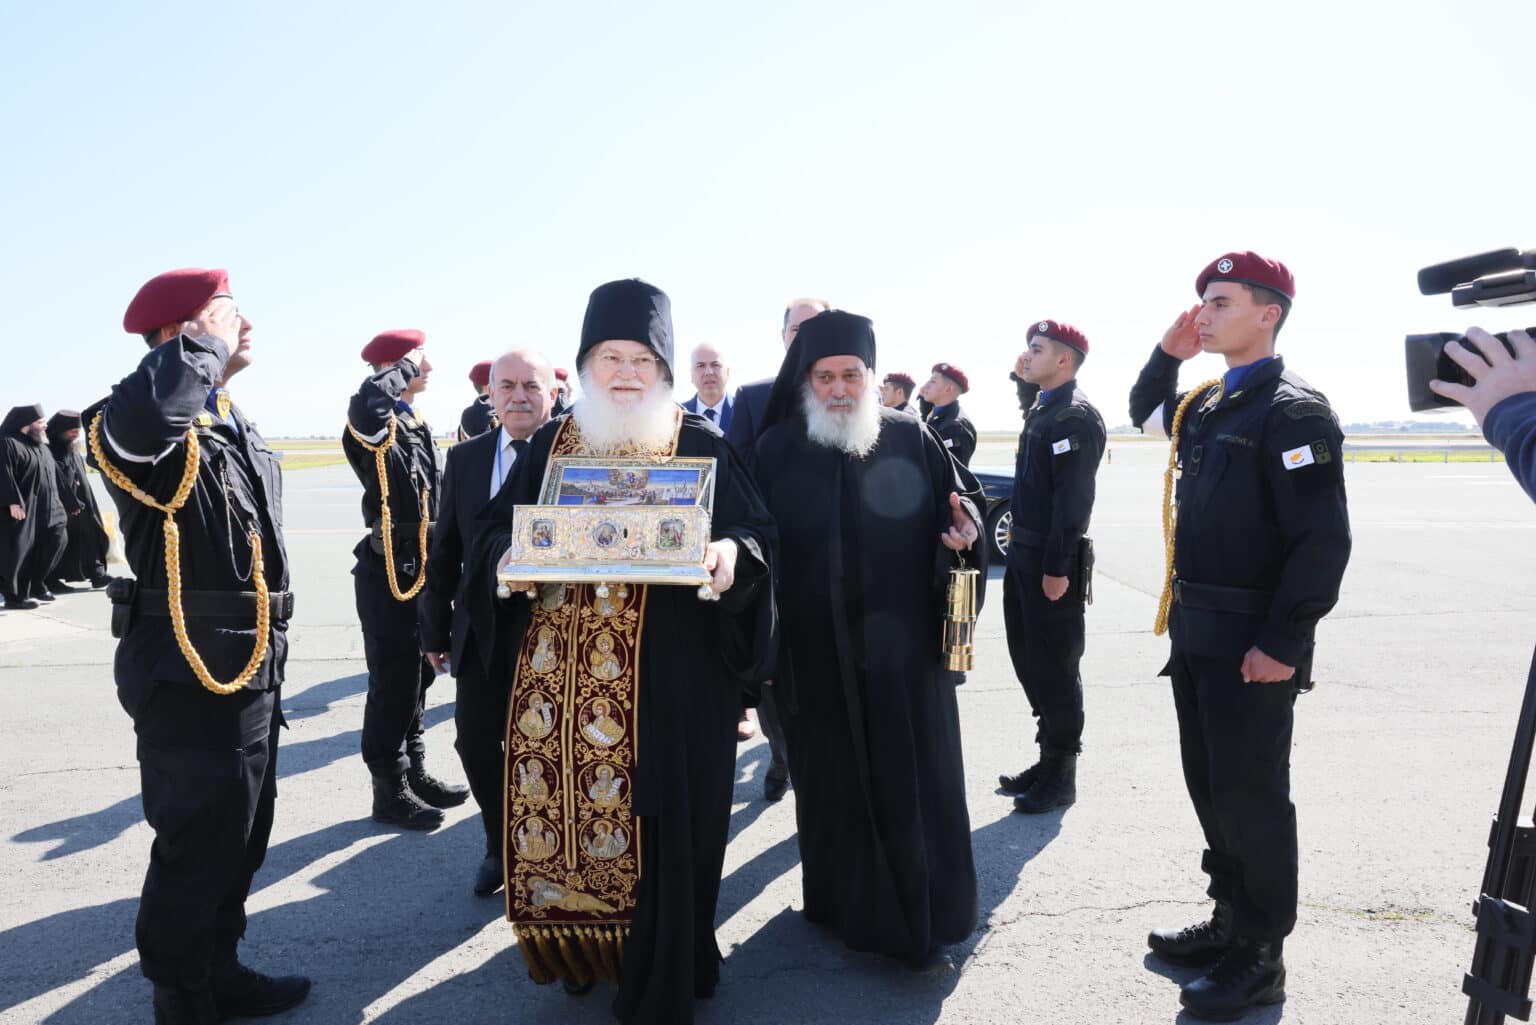 The Holy Cincture of the Most Holy Theotokos is taken to Cyprus